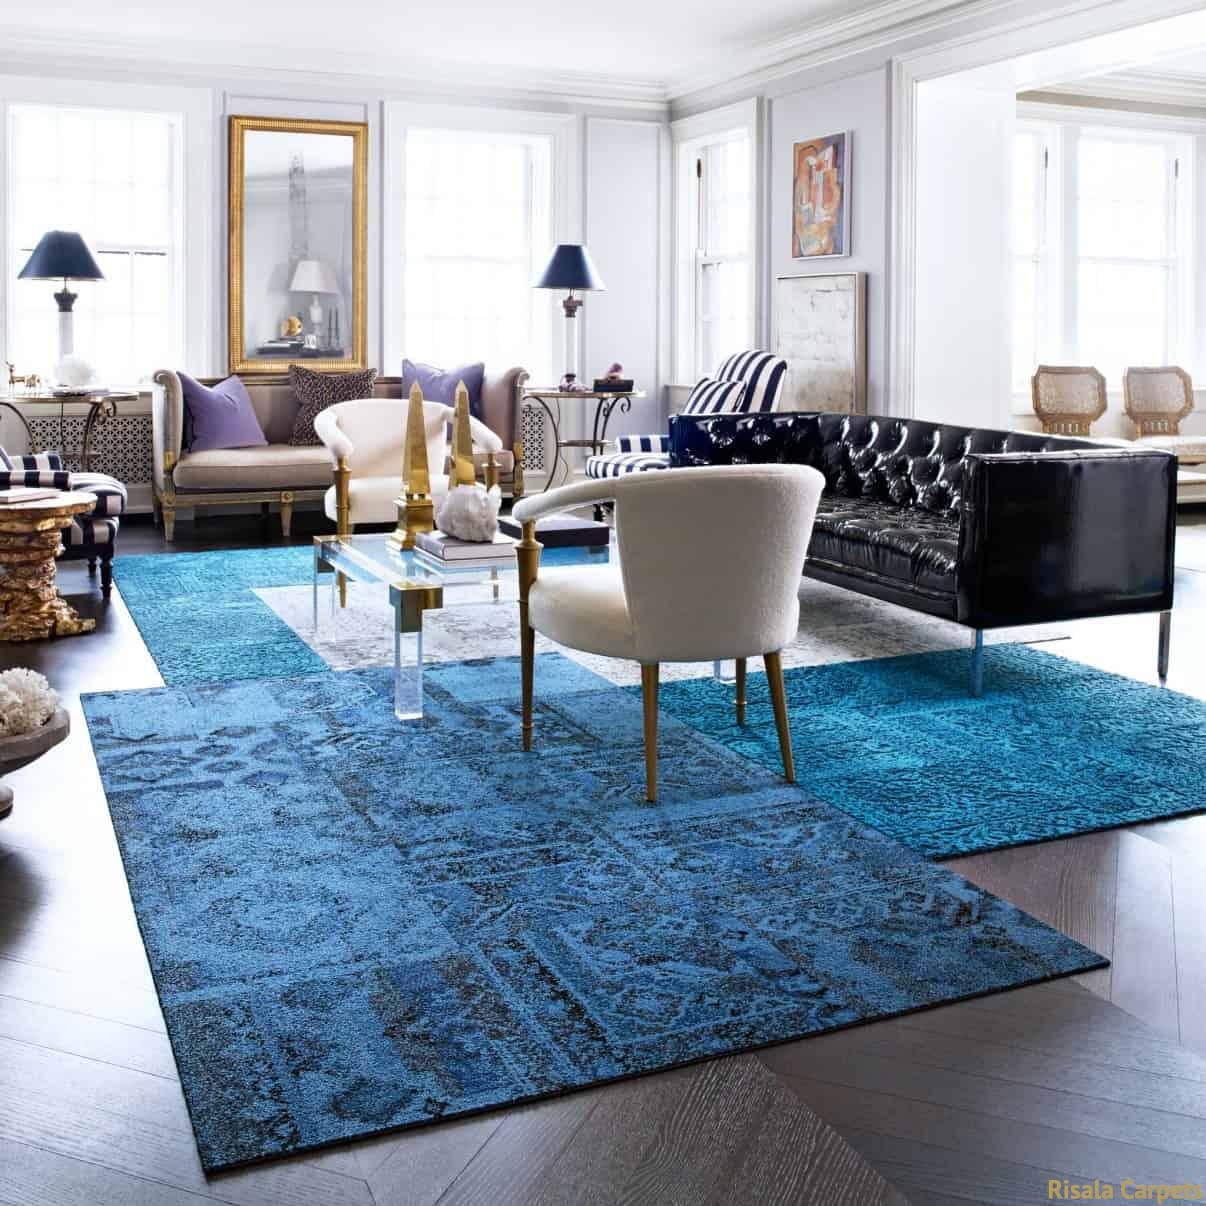 Custom-Made Patchwork Rugs in Dubai for Your Home or Office